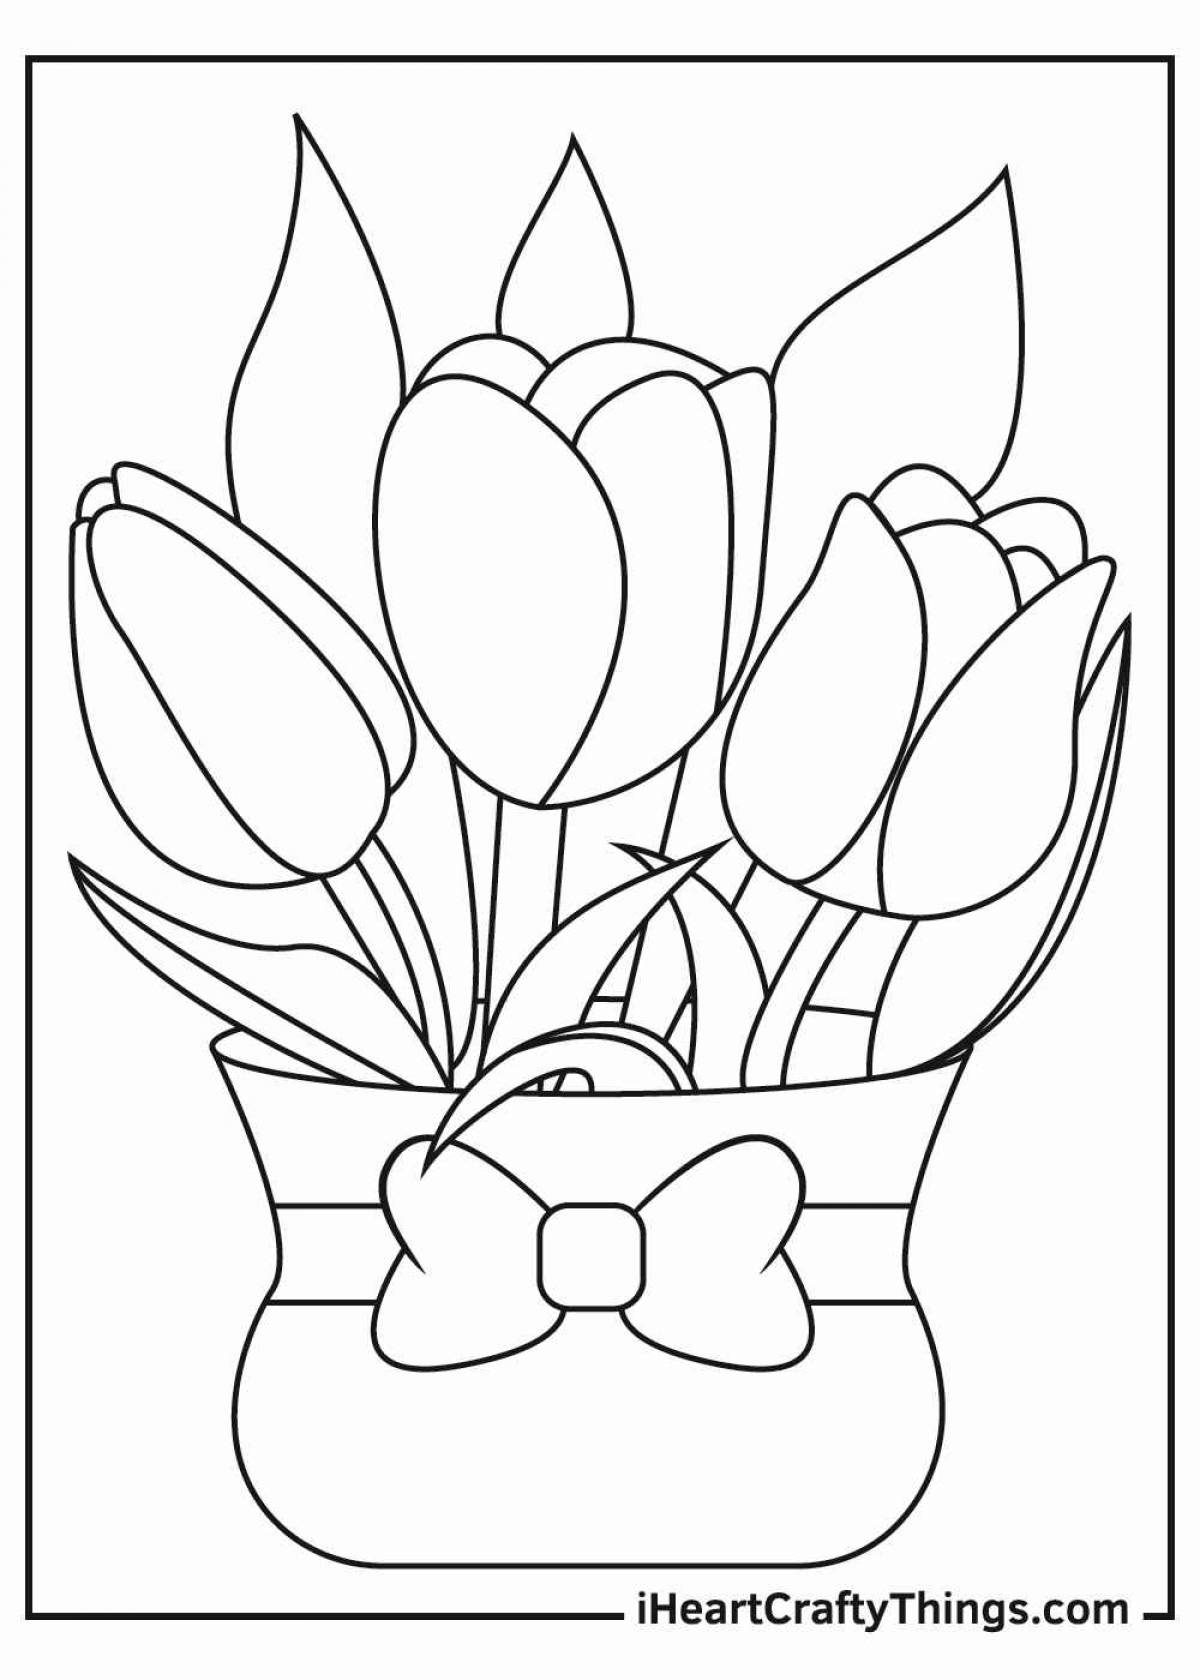 Gorgeous tulips coloring for kids